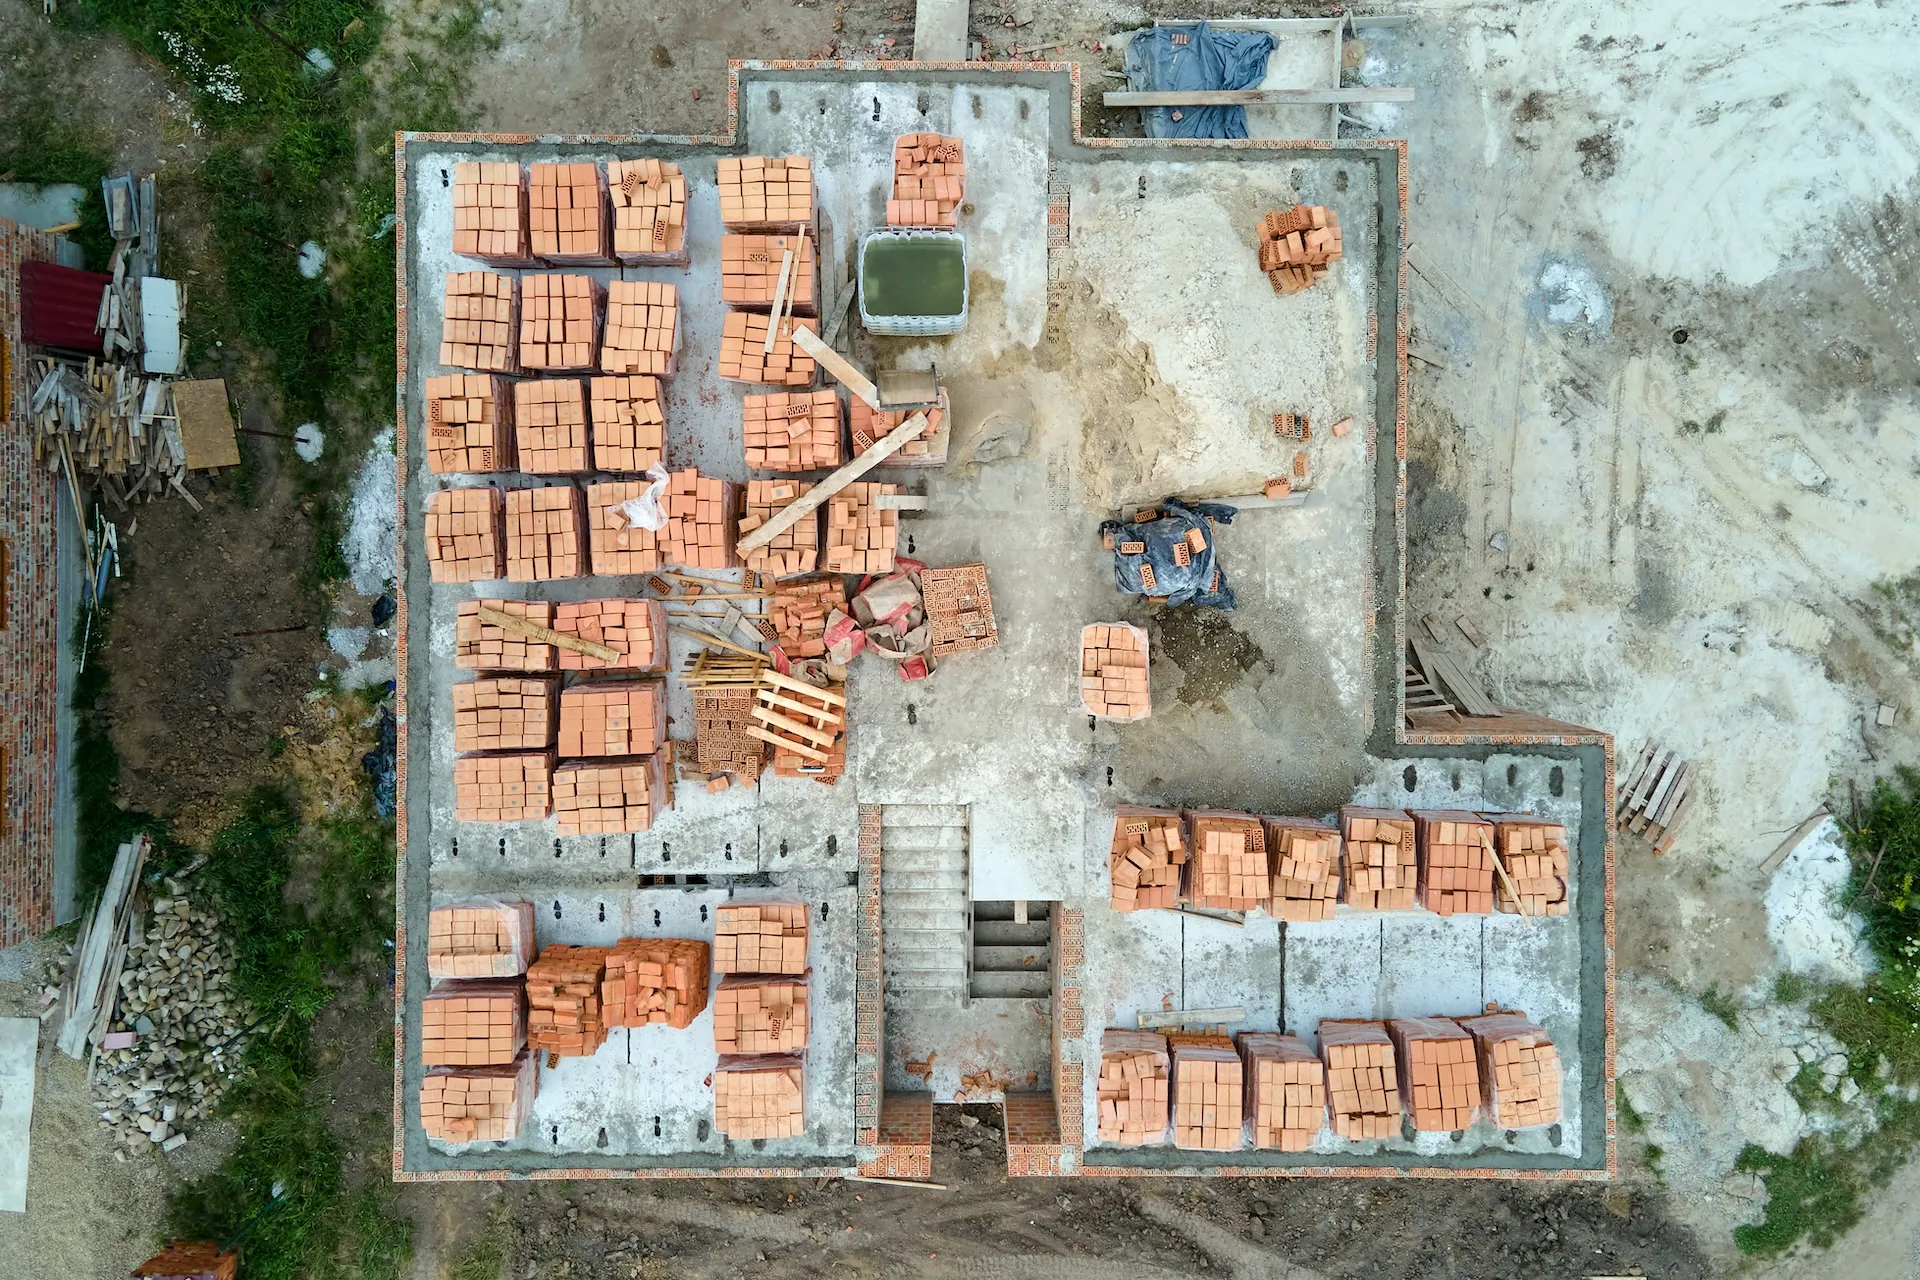 Drone Footage of A Construction Site